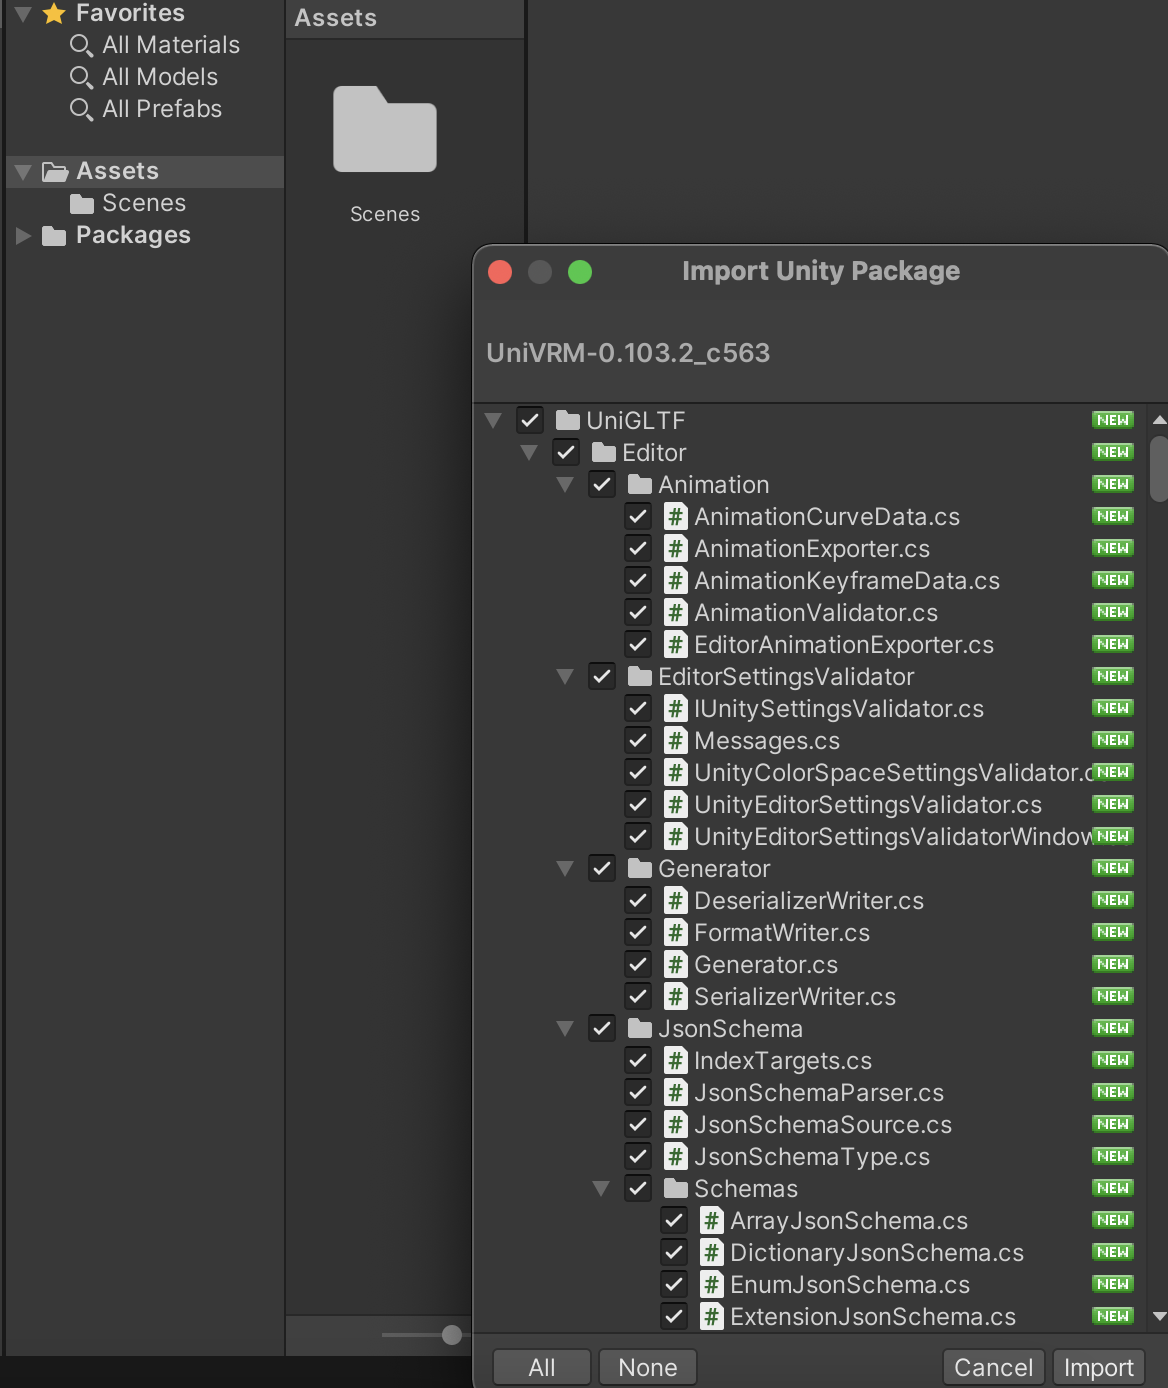 Screenshot of Blender showing the import of the unity package